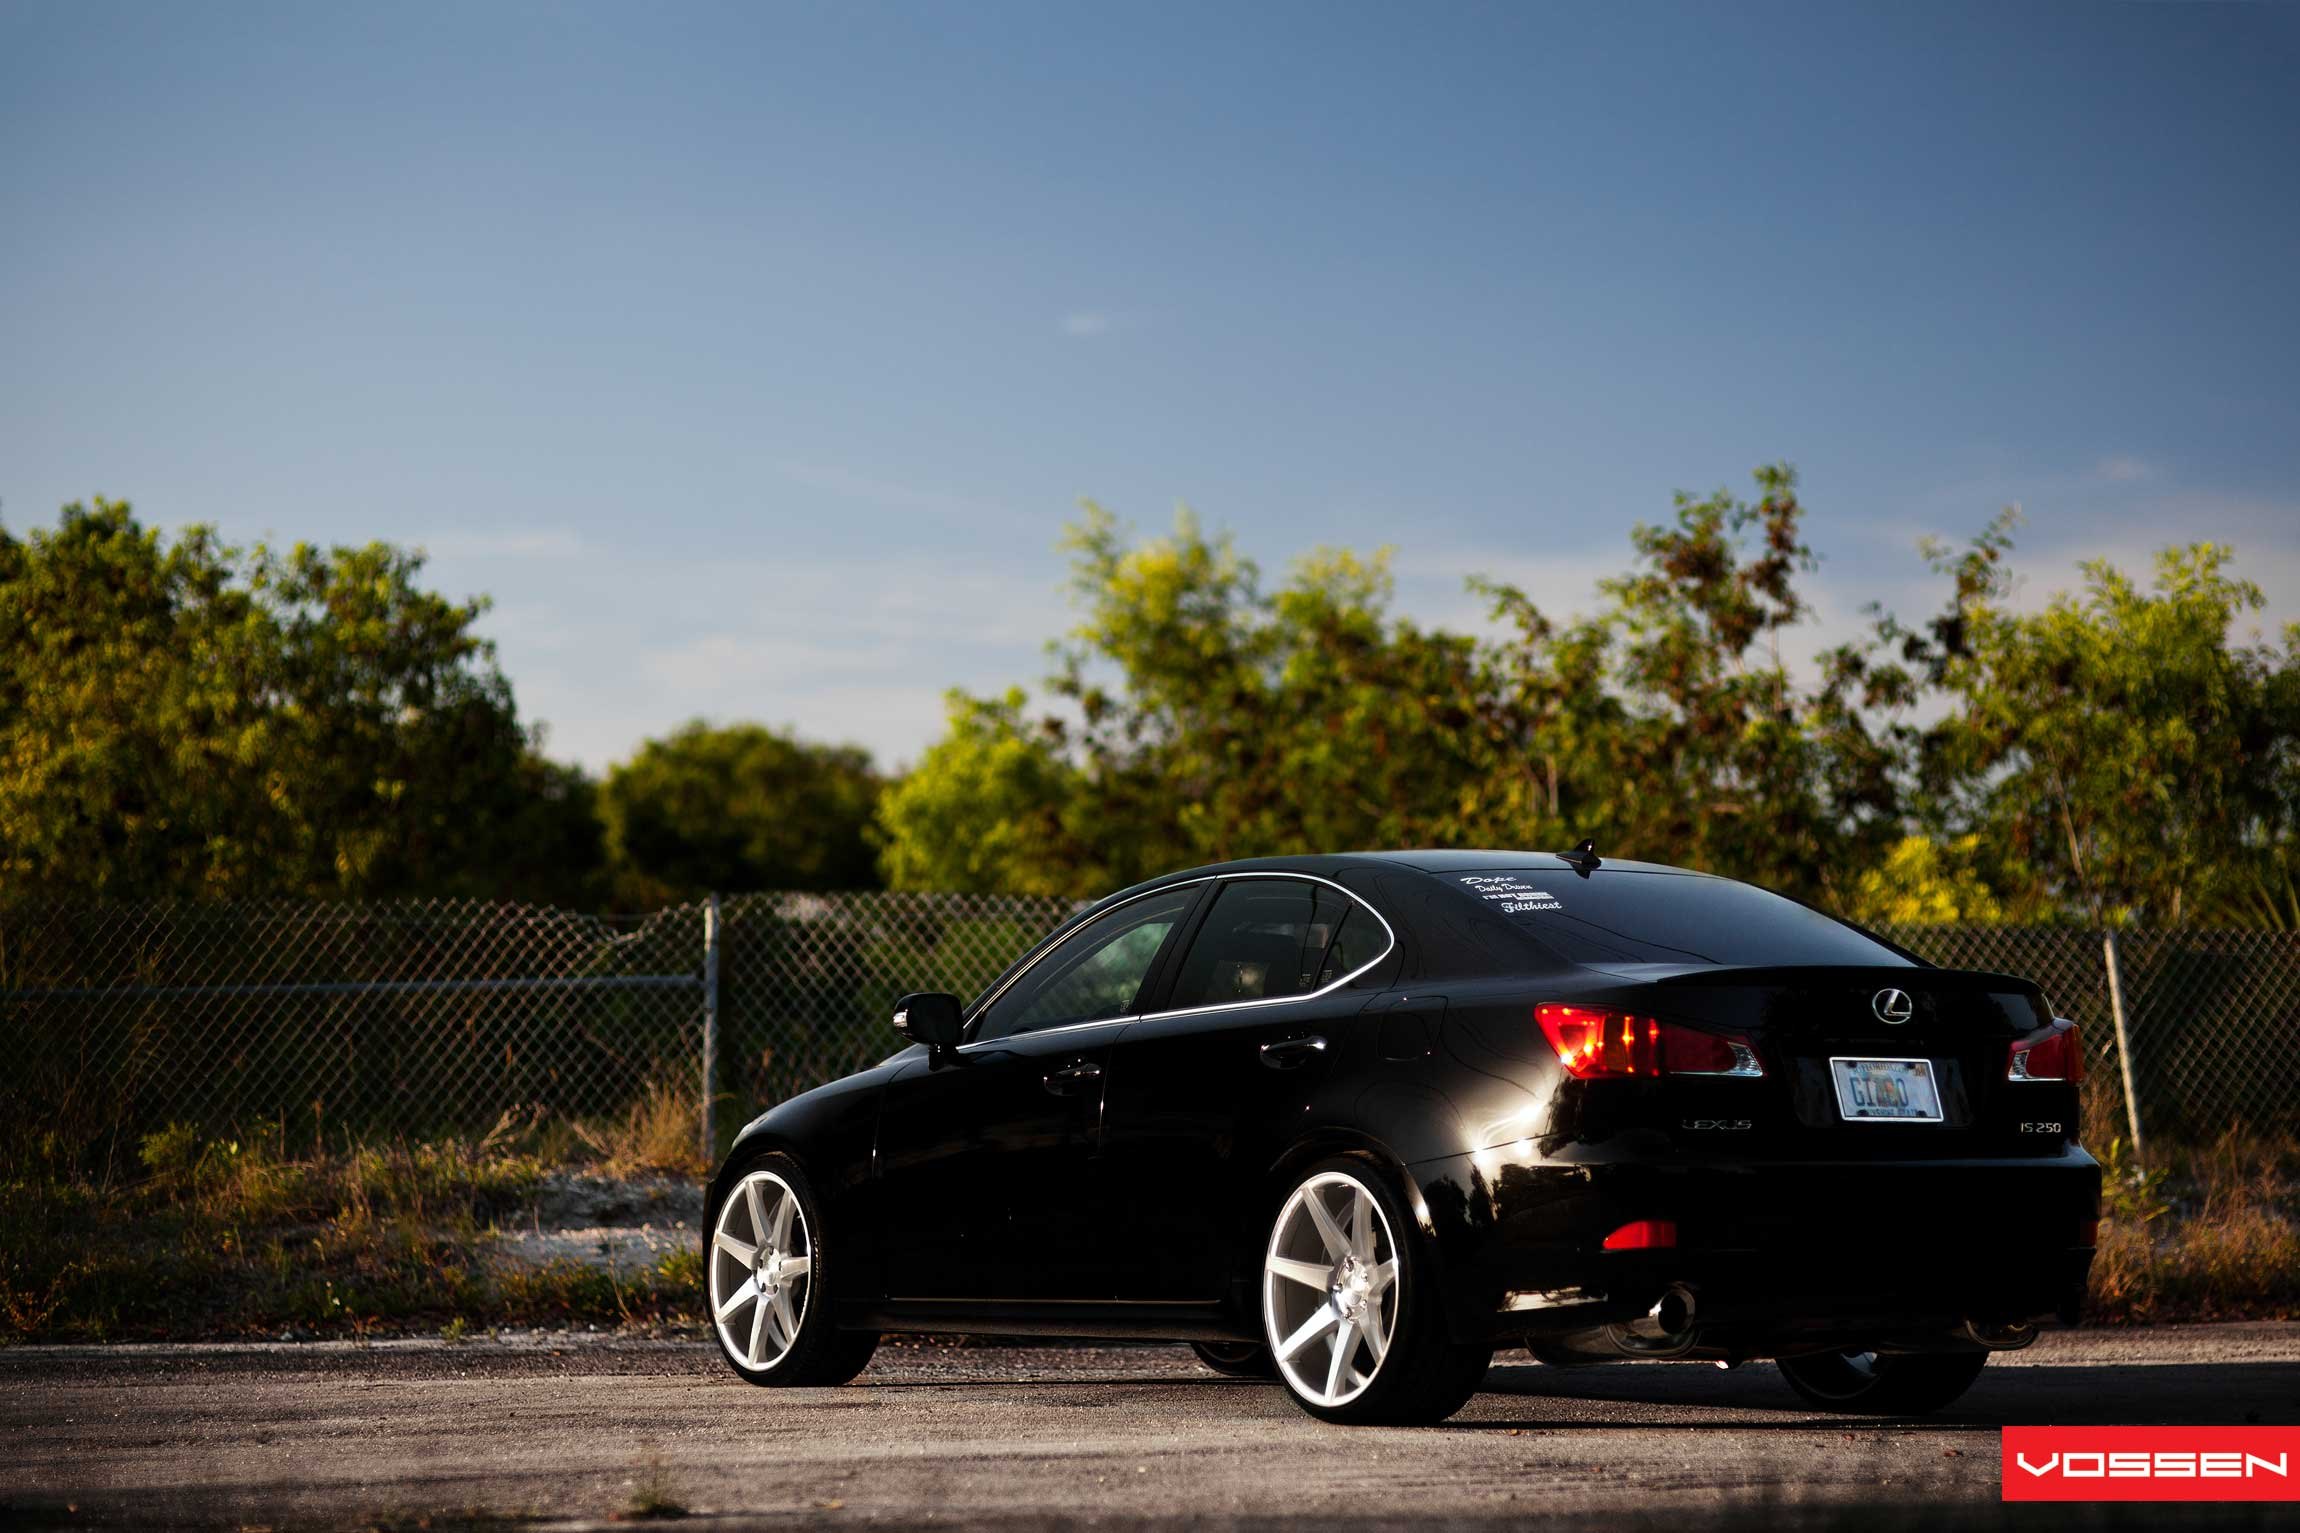 Black Debadged Lexus IS 250 with Custom Exhaust System - Photo by Vossen